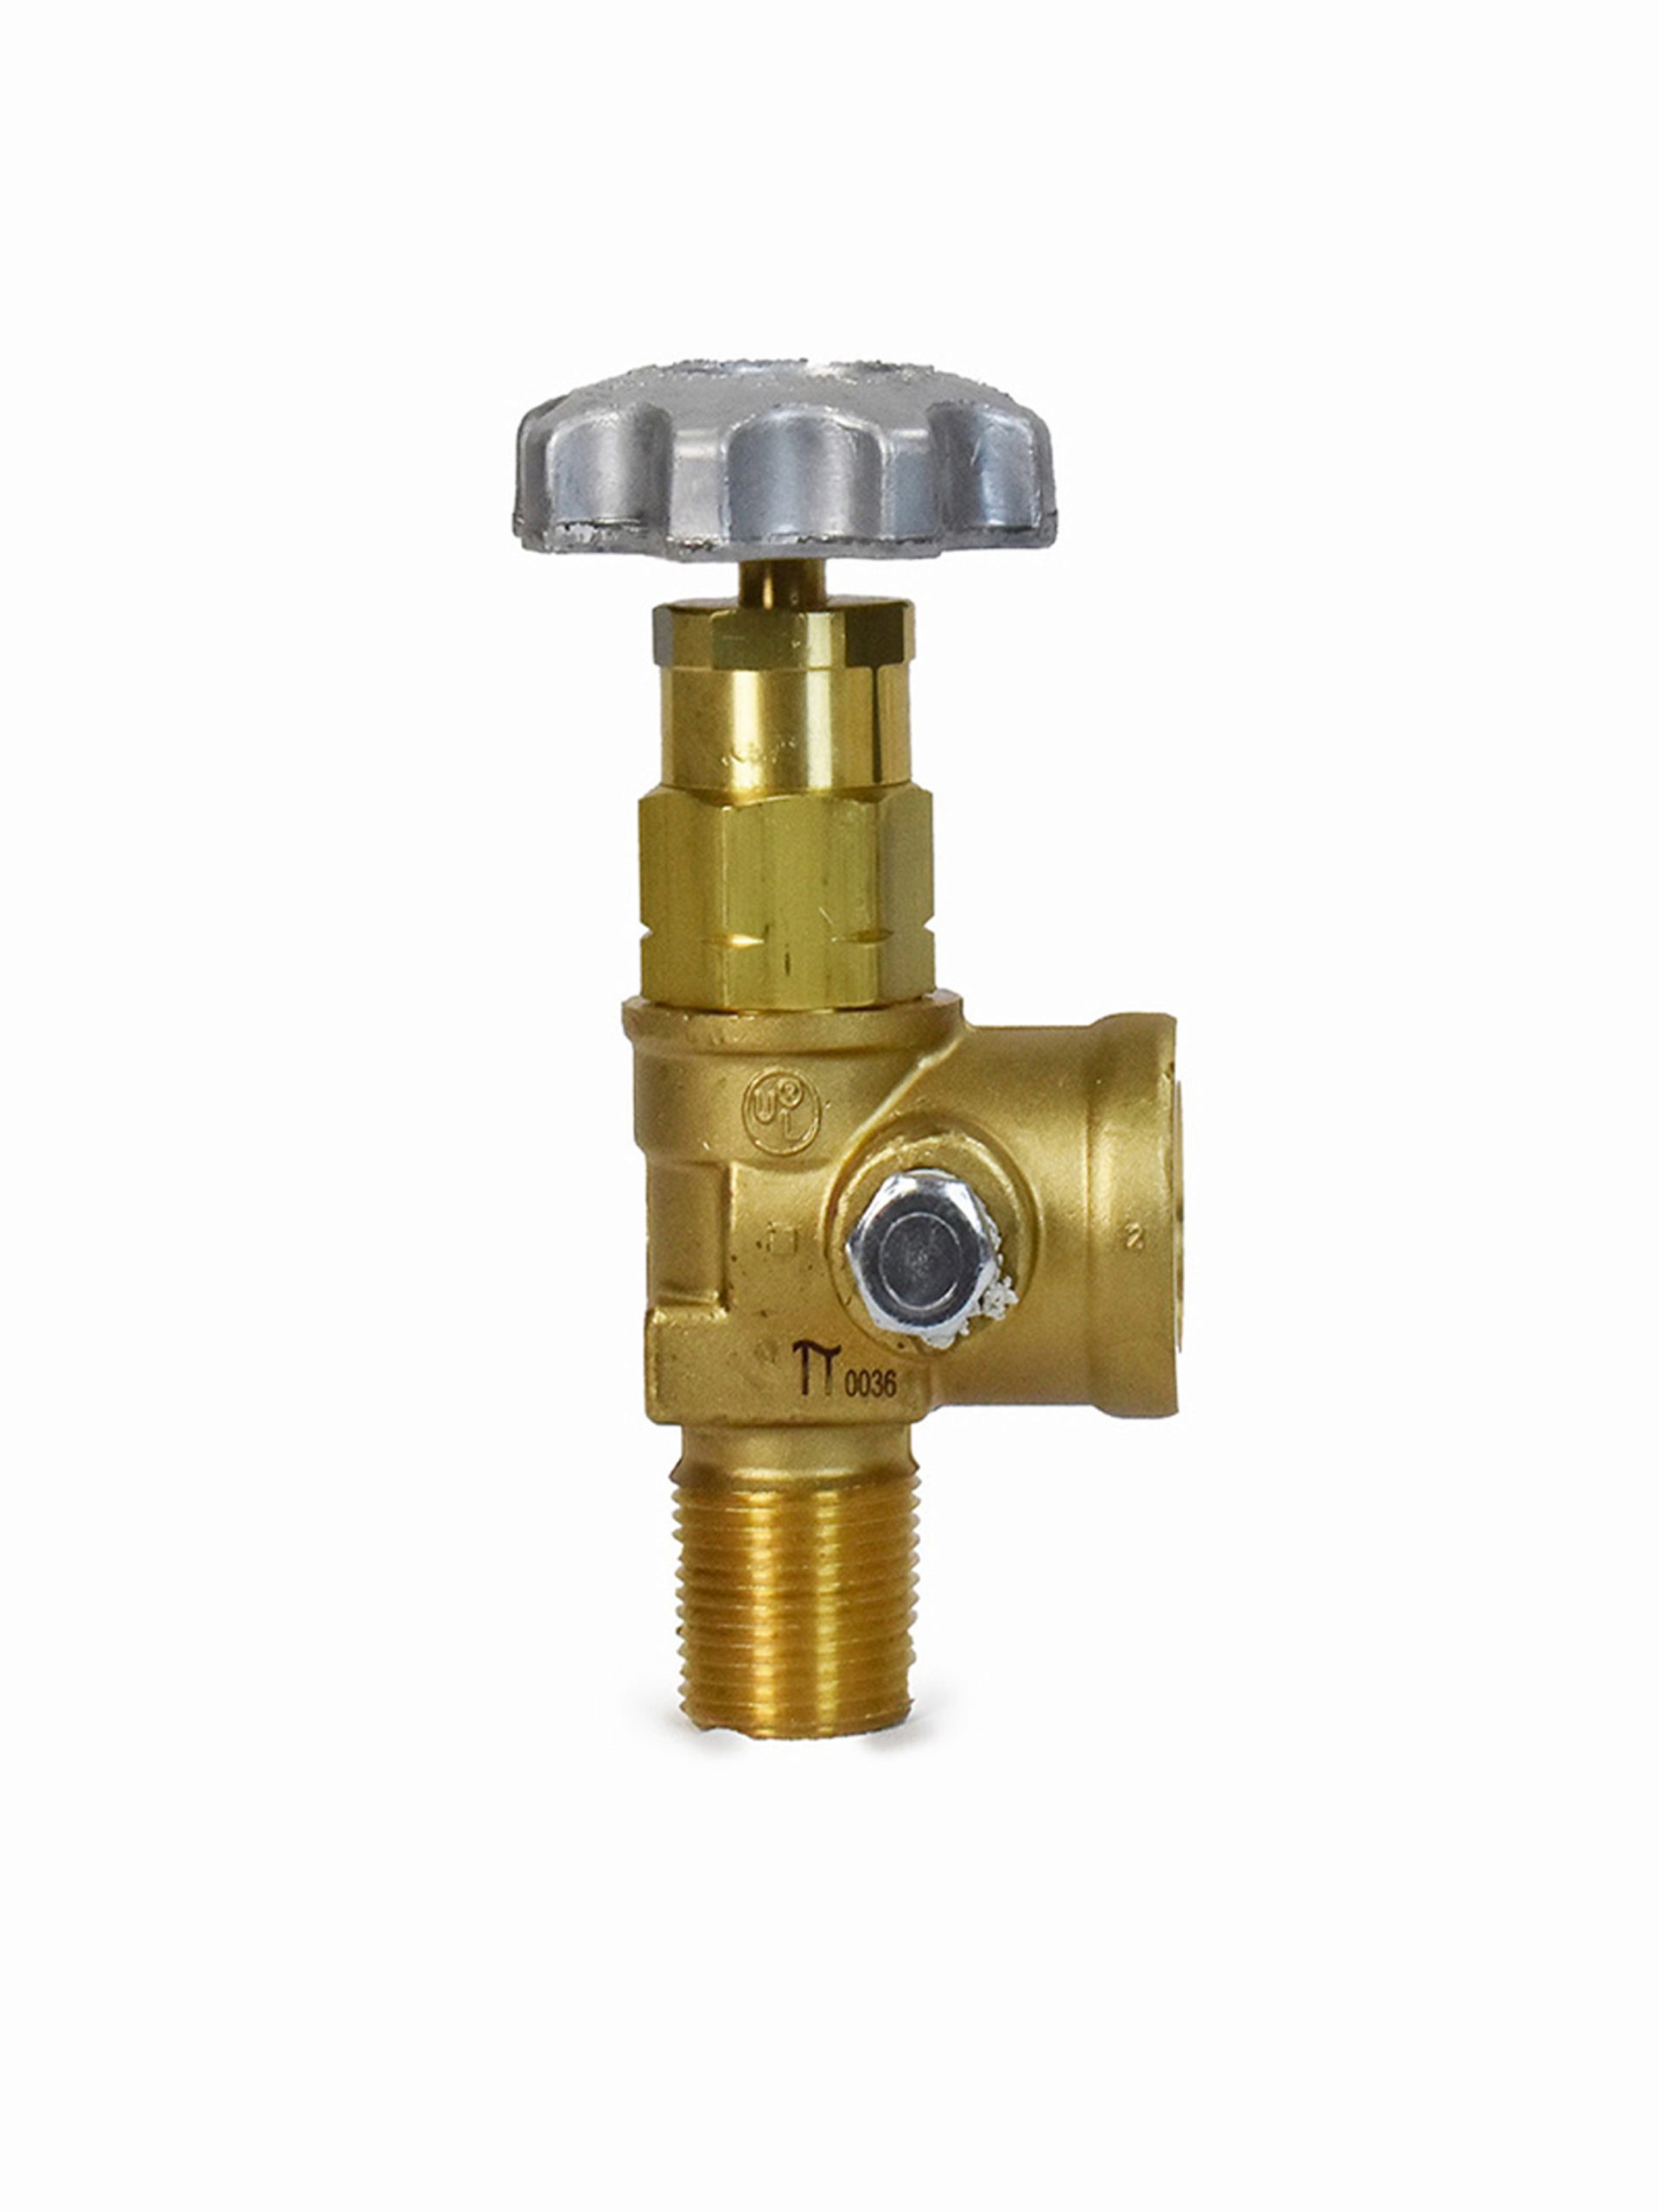 ANGLE VALVE 3/4 Inches Male NPT (LIQUID WITHDRAWAL VALVE)